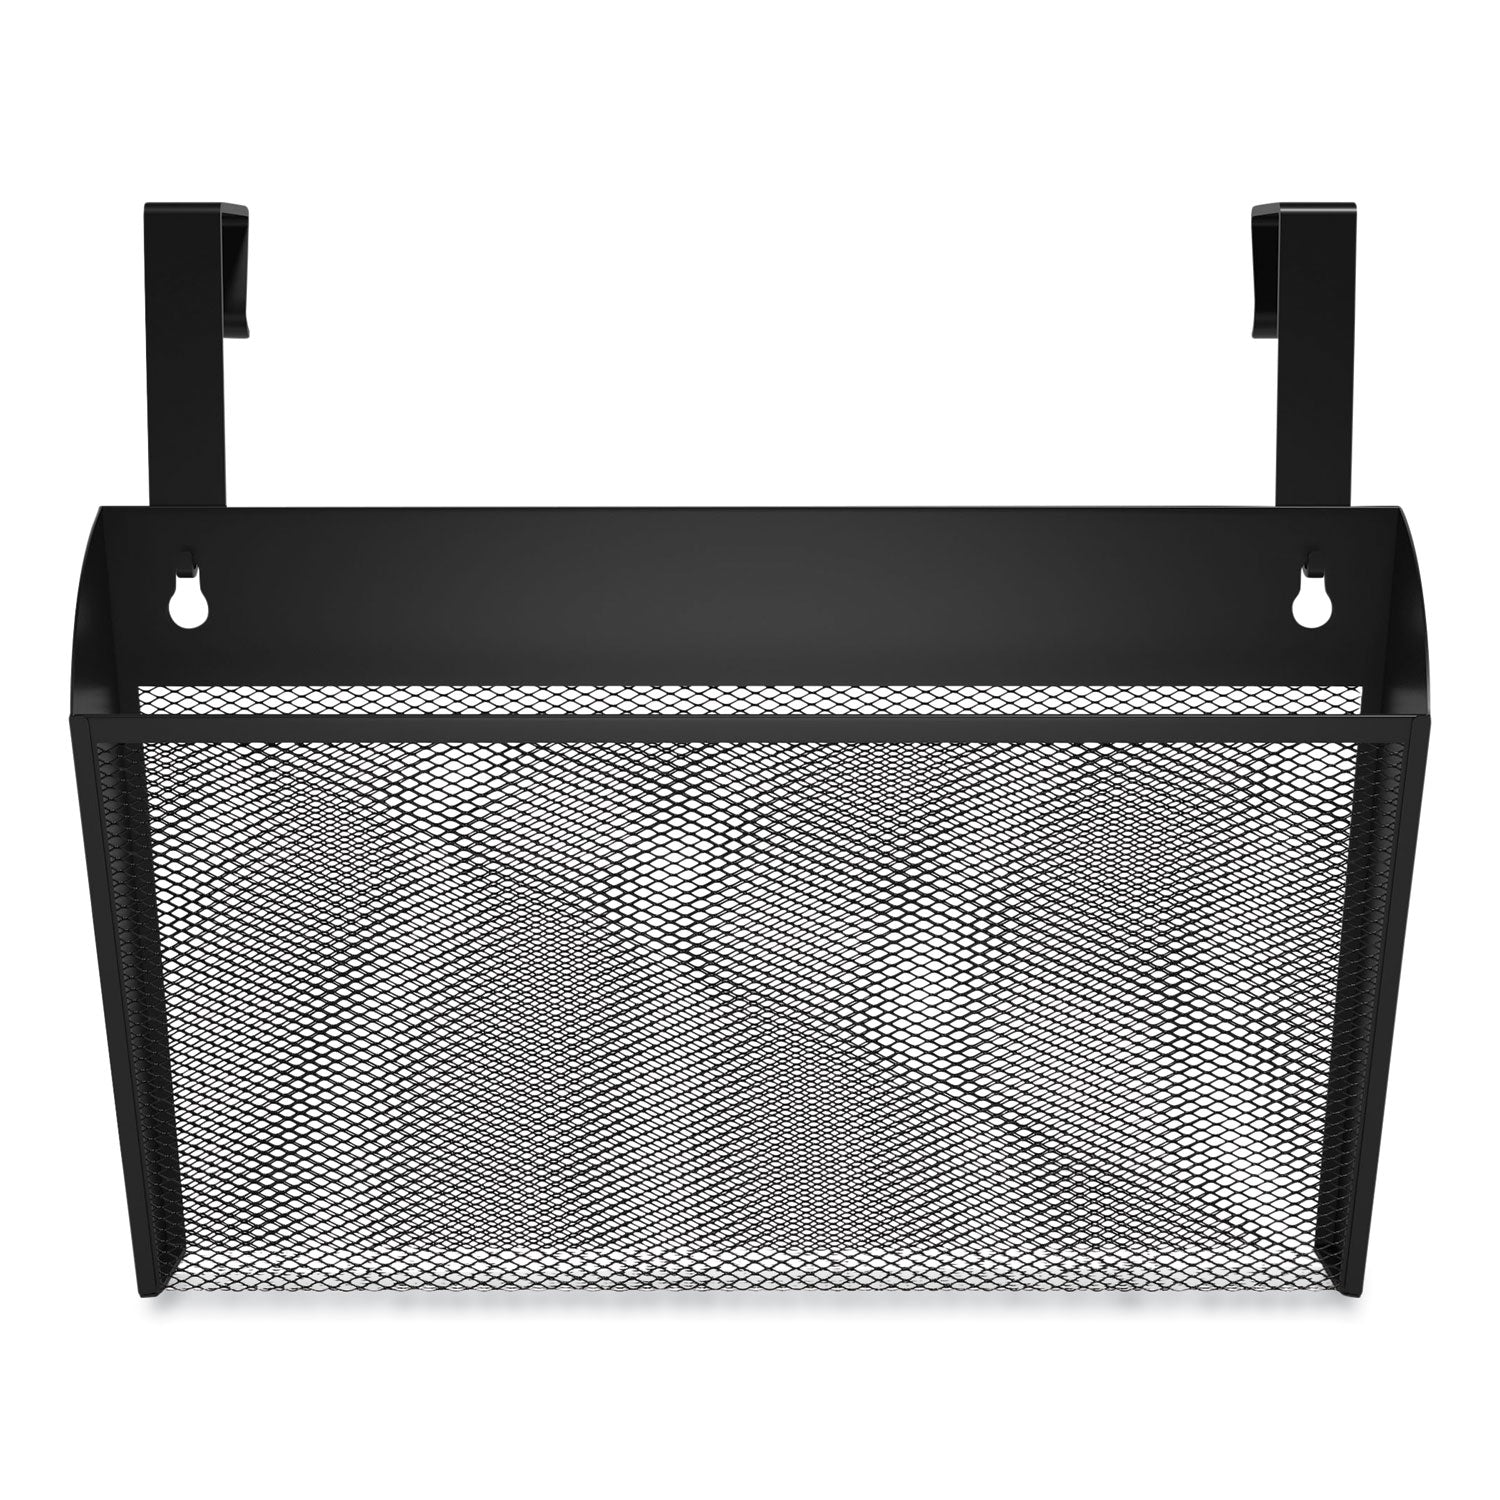 wire-mesh-wall-file-letter-size-1437-x-334-black_tud24402465 - 1